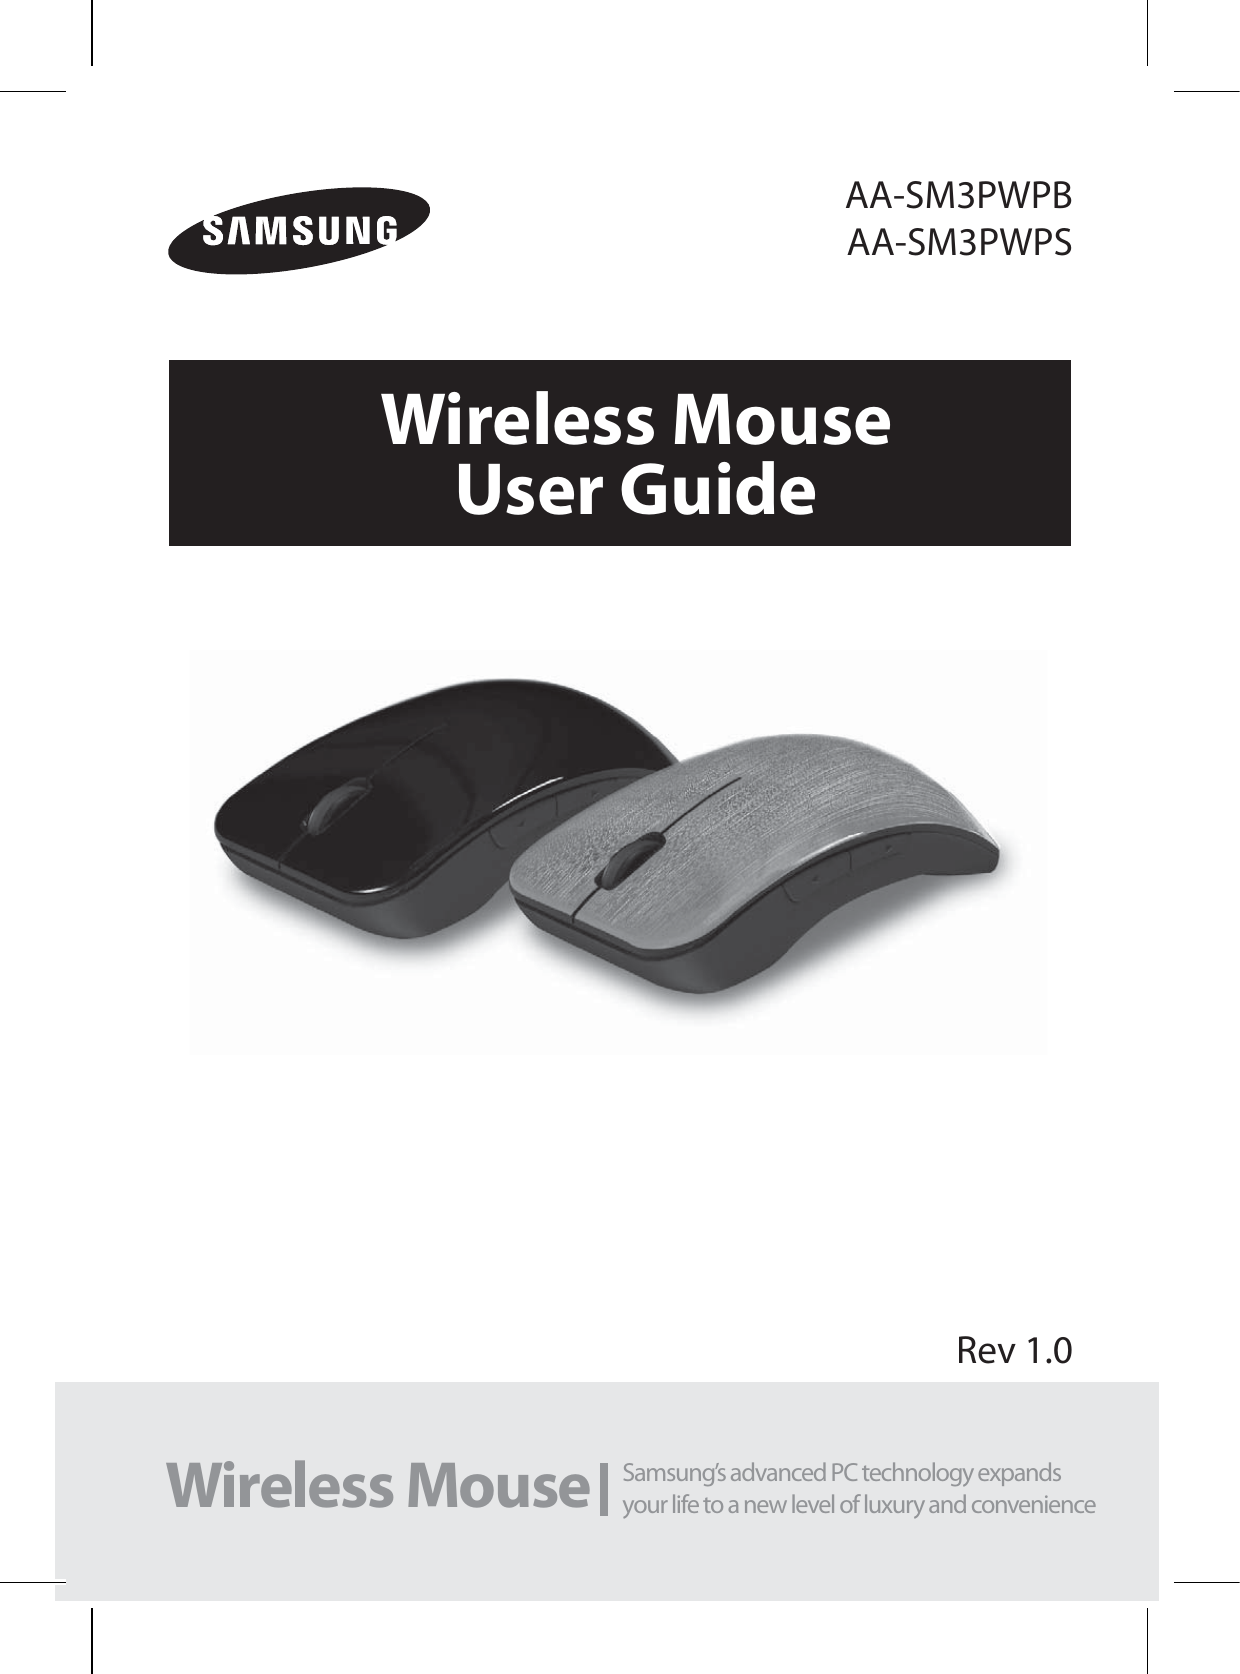 AA-SM3PWPBAA-SM3PWPSRev 1.0Samsung’s advanced PC technology expands  your life to a new level of luxury and convenienceWireless MouseWireless MouseUser Guide